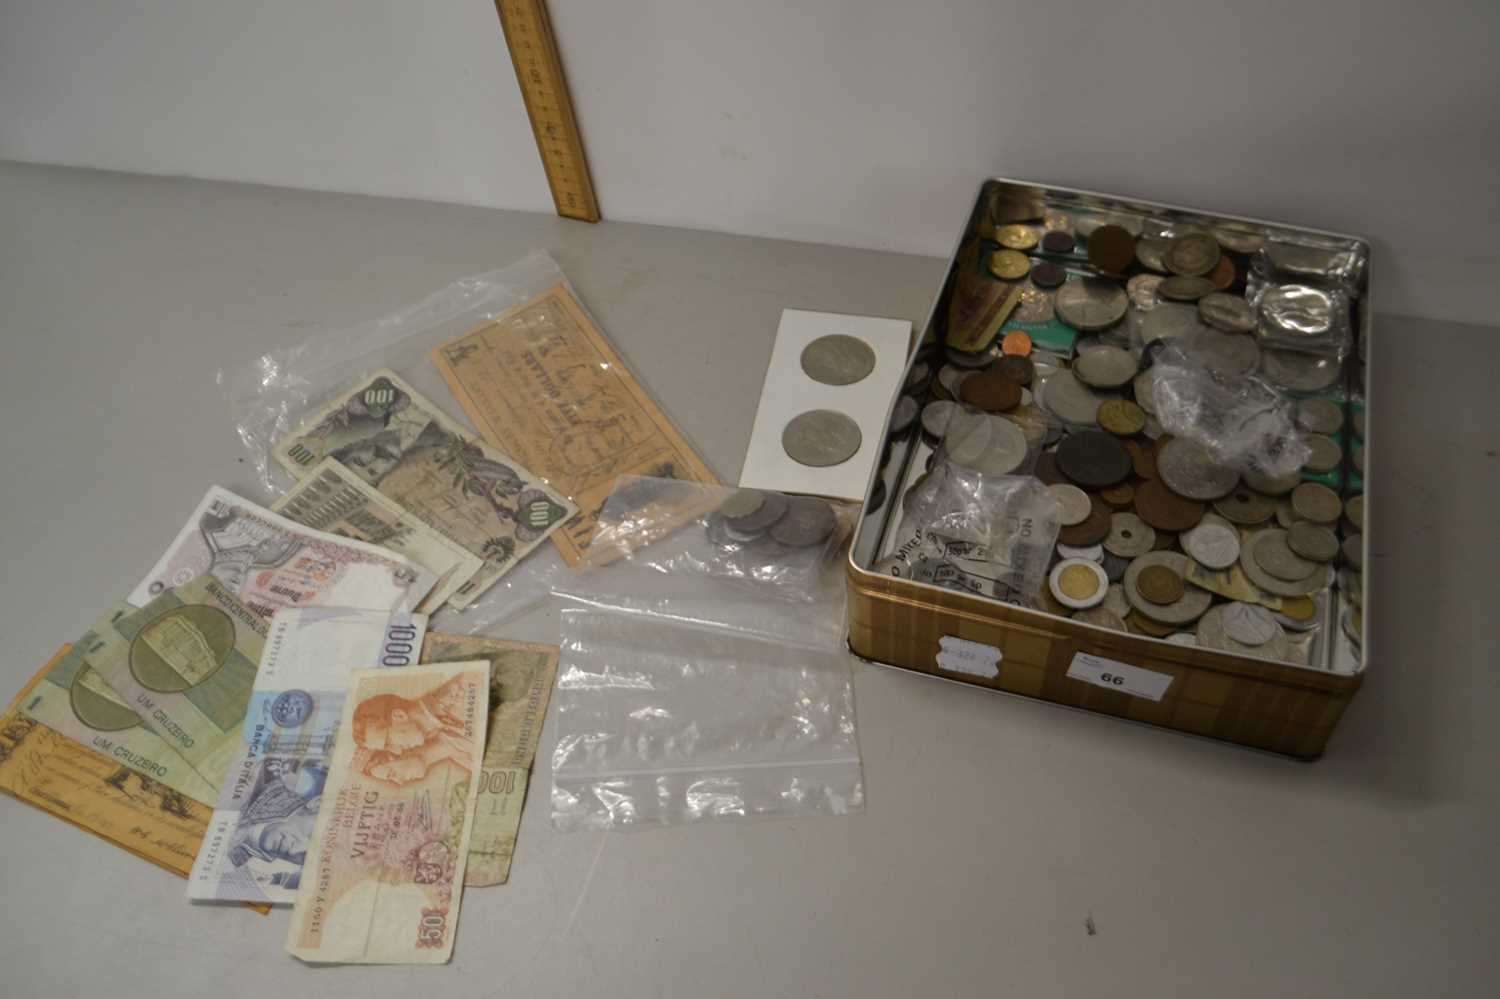 Box of various vintage coinage, bank notes etc - used condition throughout